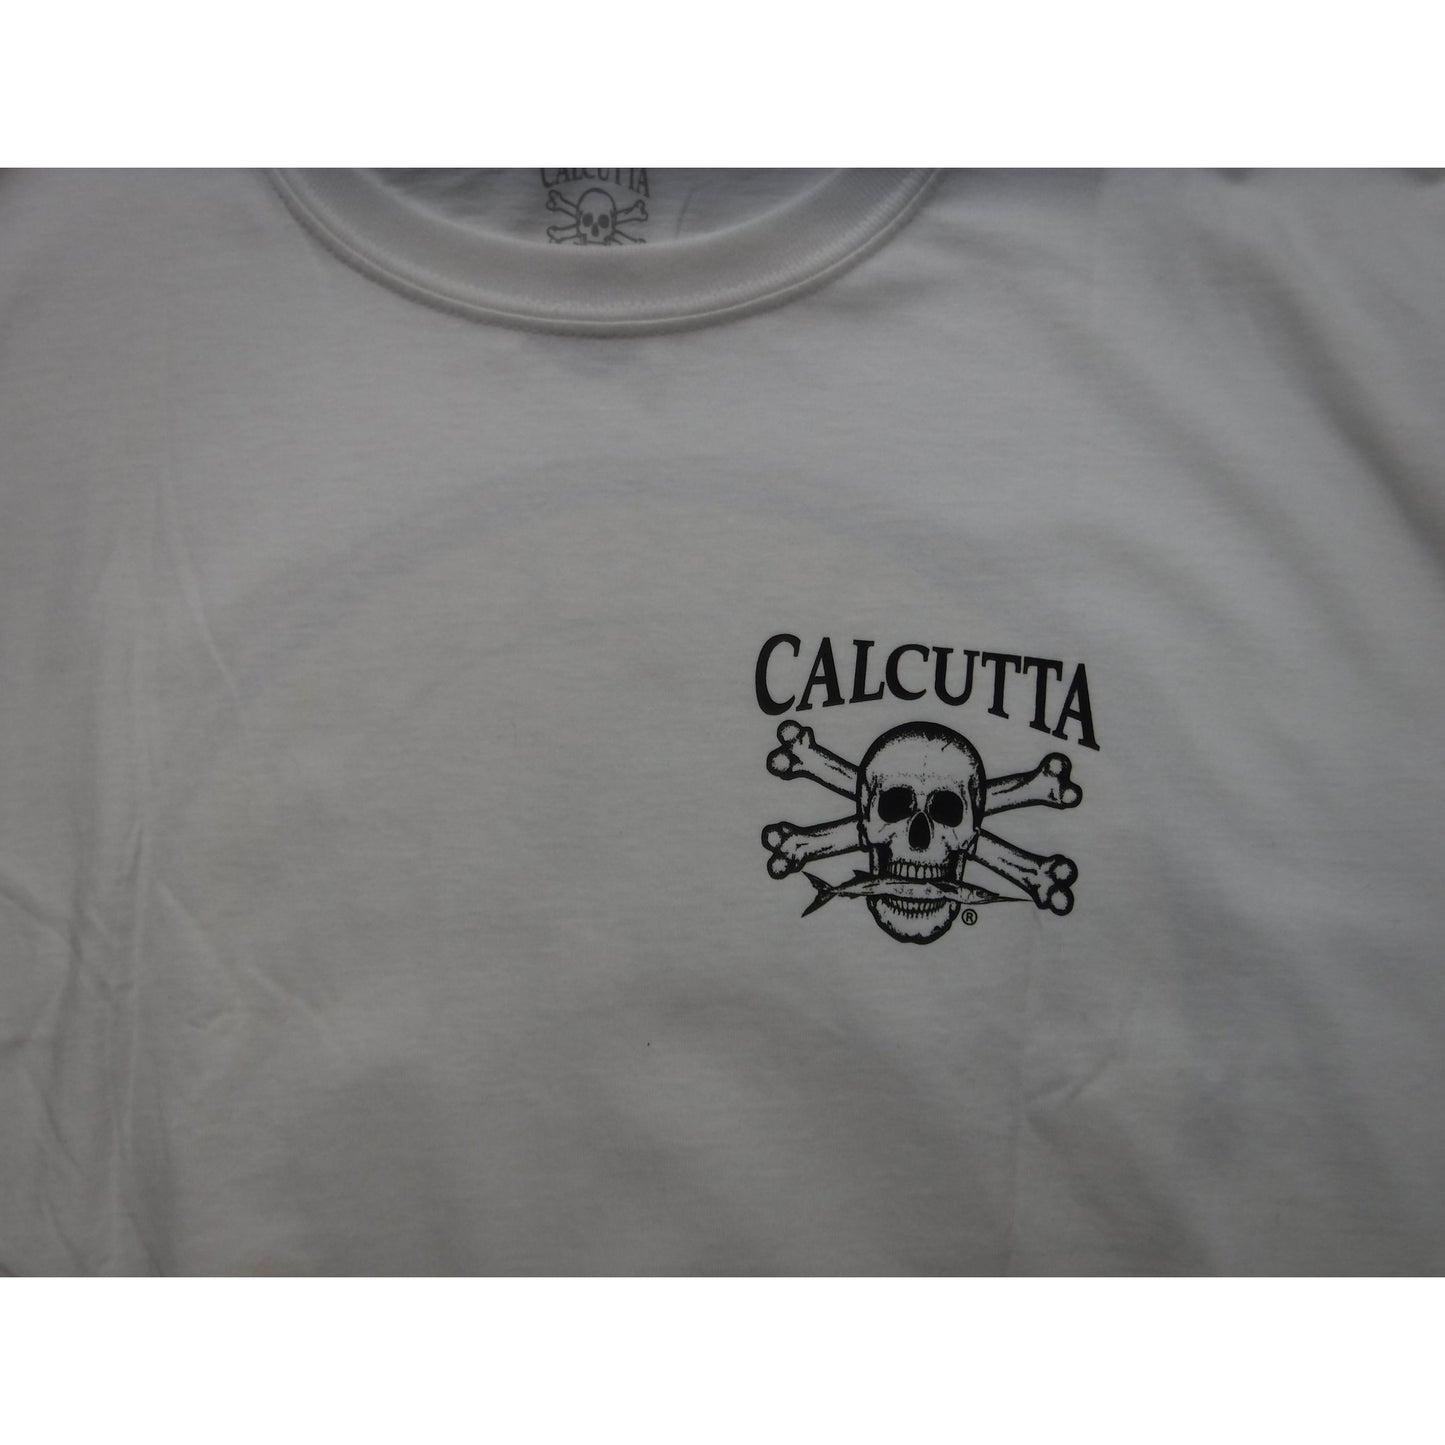 New Authentic Calcutta Short Sleeve Shirt White/ Front Black Original Small Logo/ Circle Patch Logo on Back 2XL